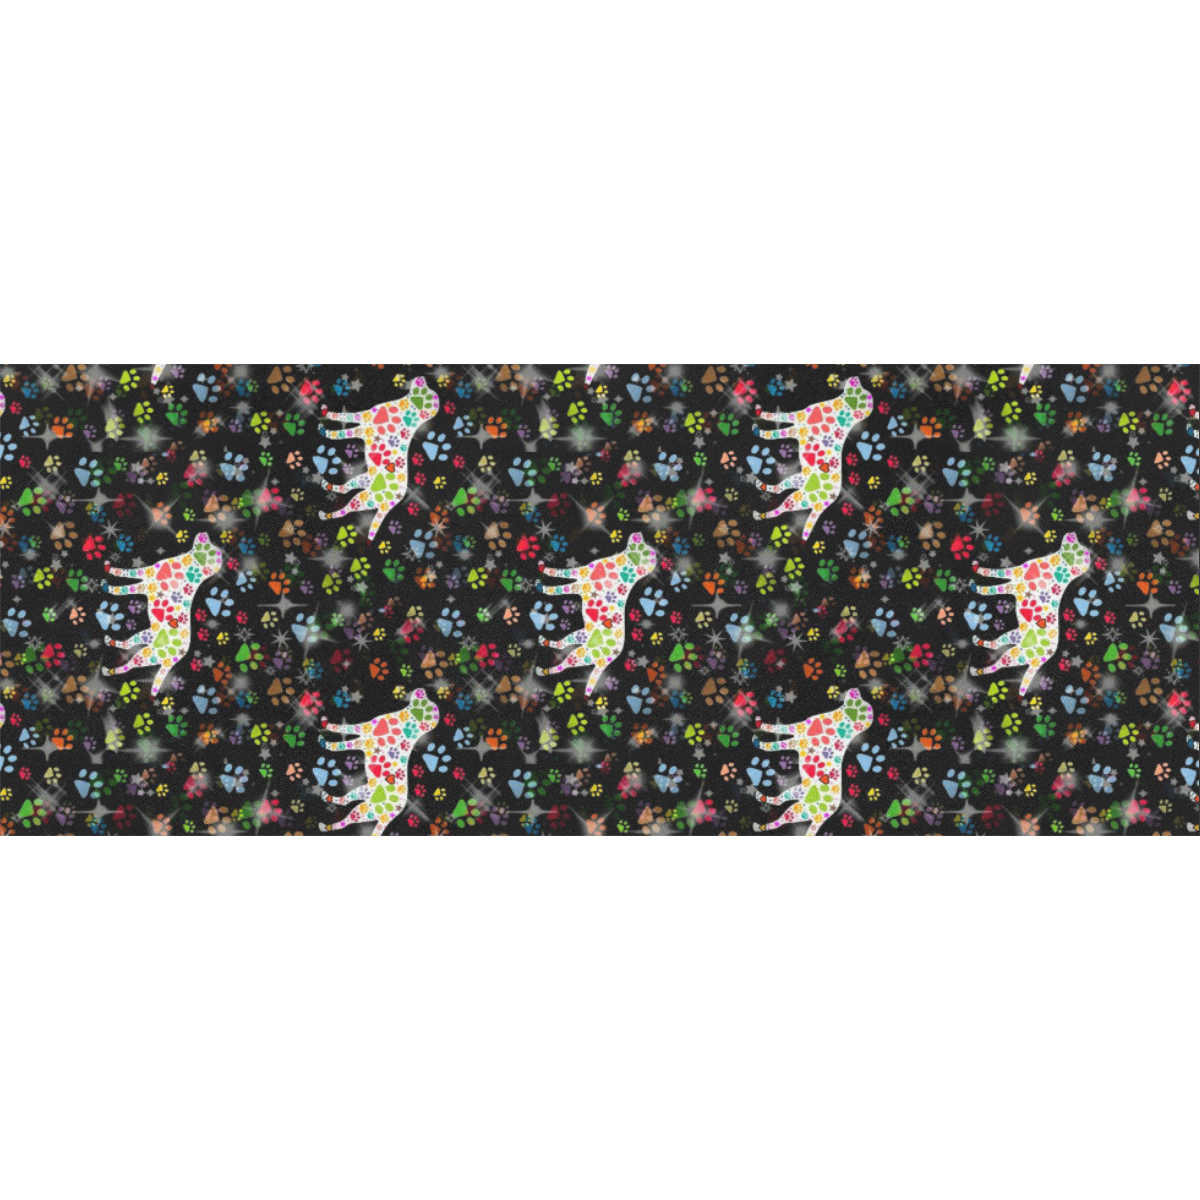 Dogs by Nico Bielow Gift Wrapping Paper 58"x 23" (3 Rolls)